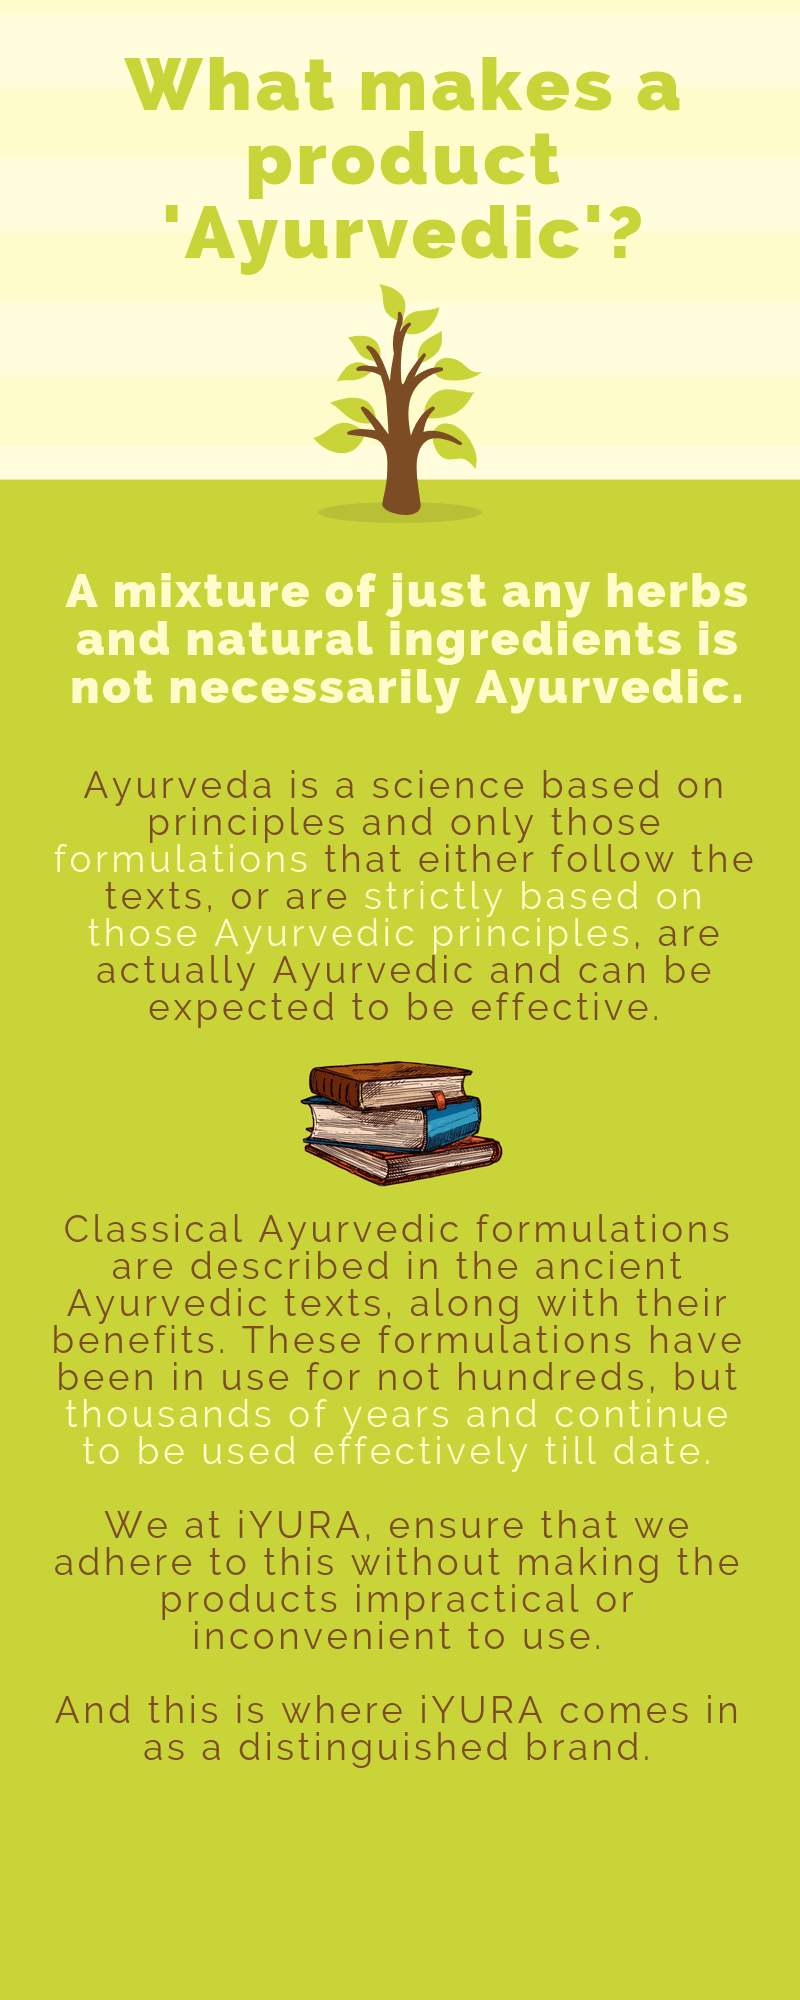 What makes a product 'Ayurvedic'?